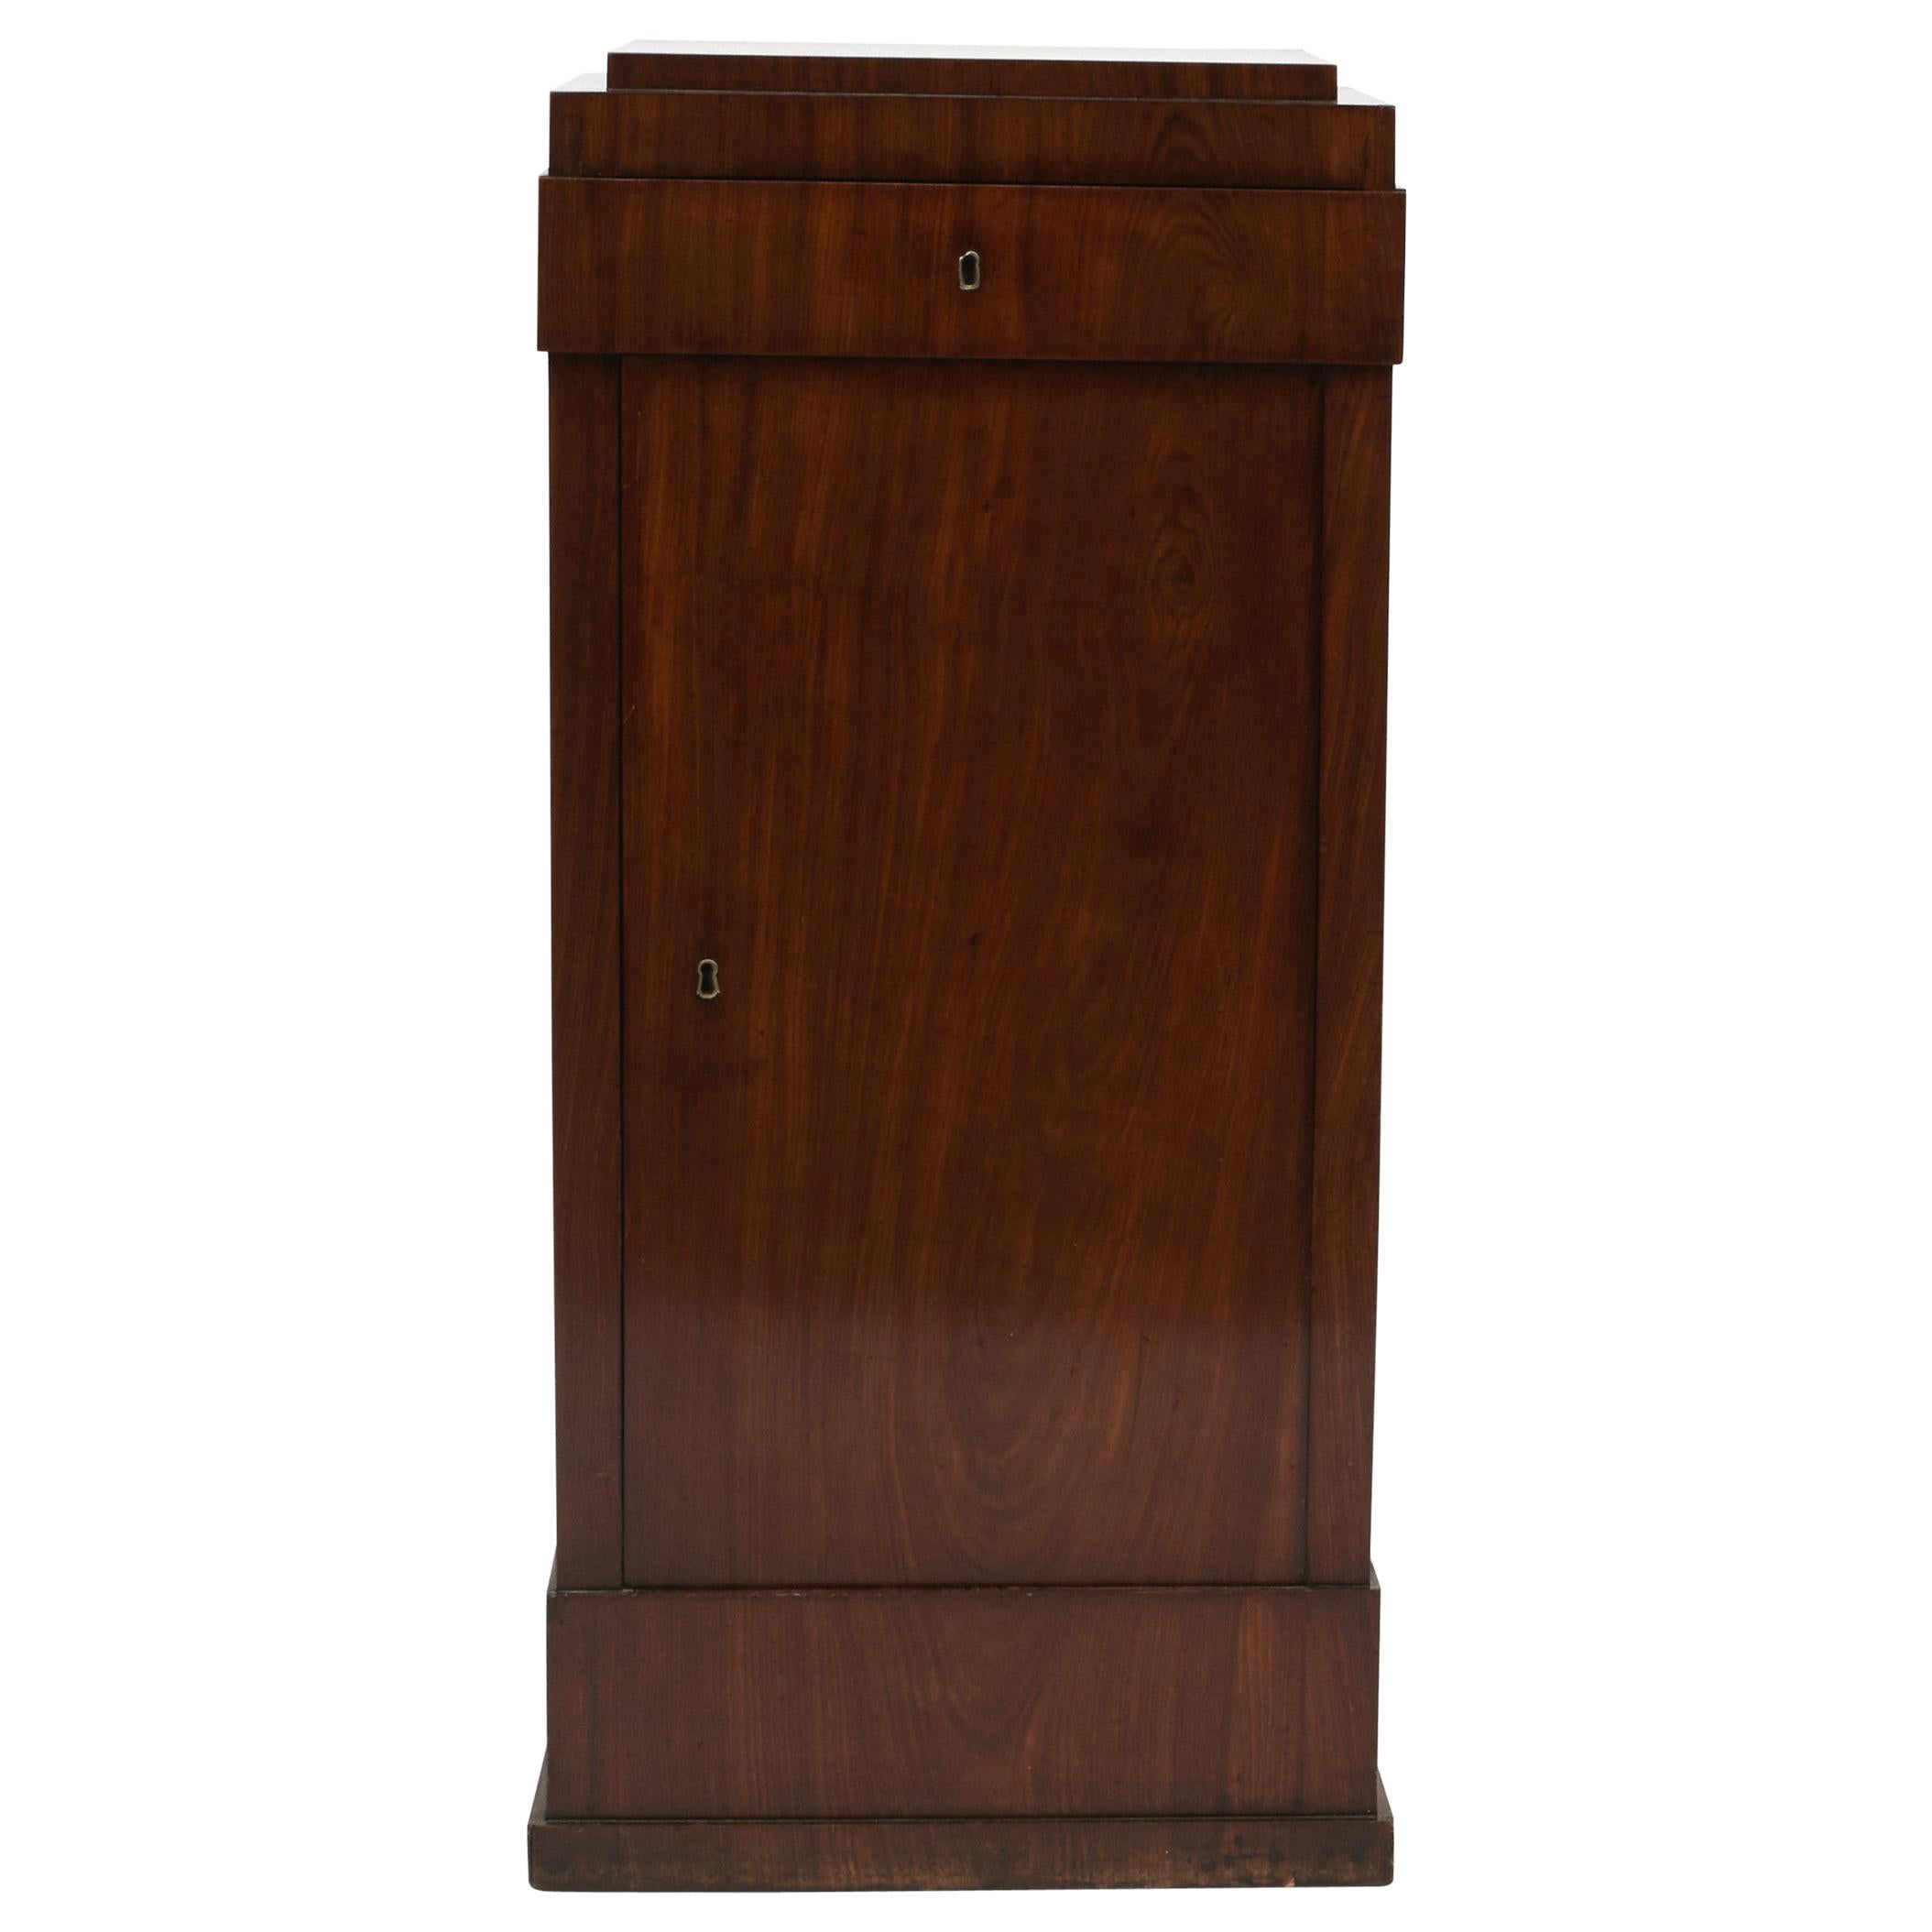 A handsome Danish Empire pedestal cabinet. Made in mahogany with beautiful wood grain.
This cabinet offers a storage drawer above a door, that opens to reveal three shelves.
Drawer with label from The Furniture Emporium of United Artwork (“Det